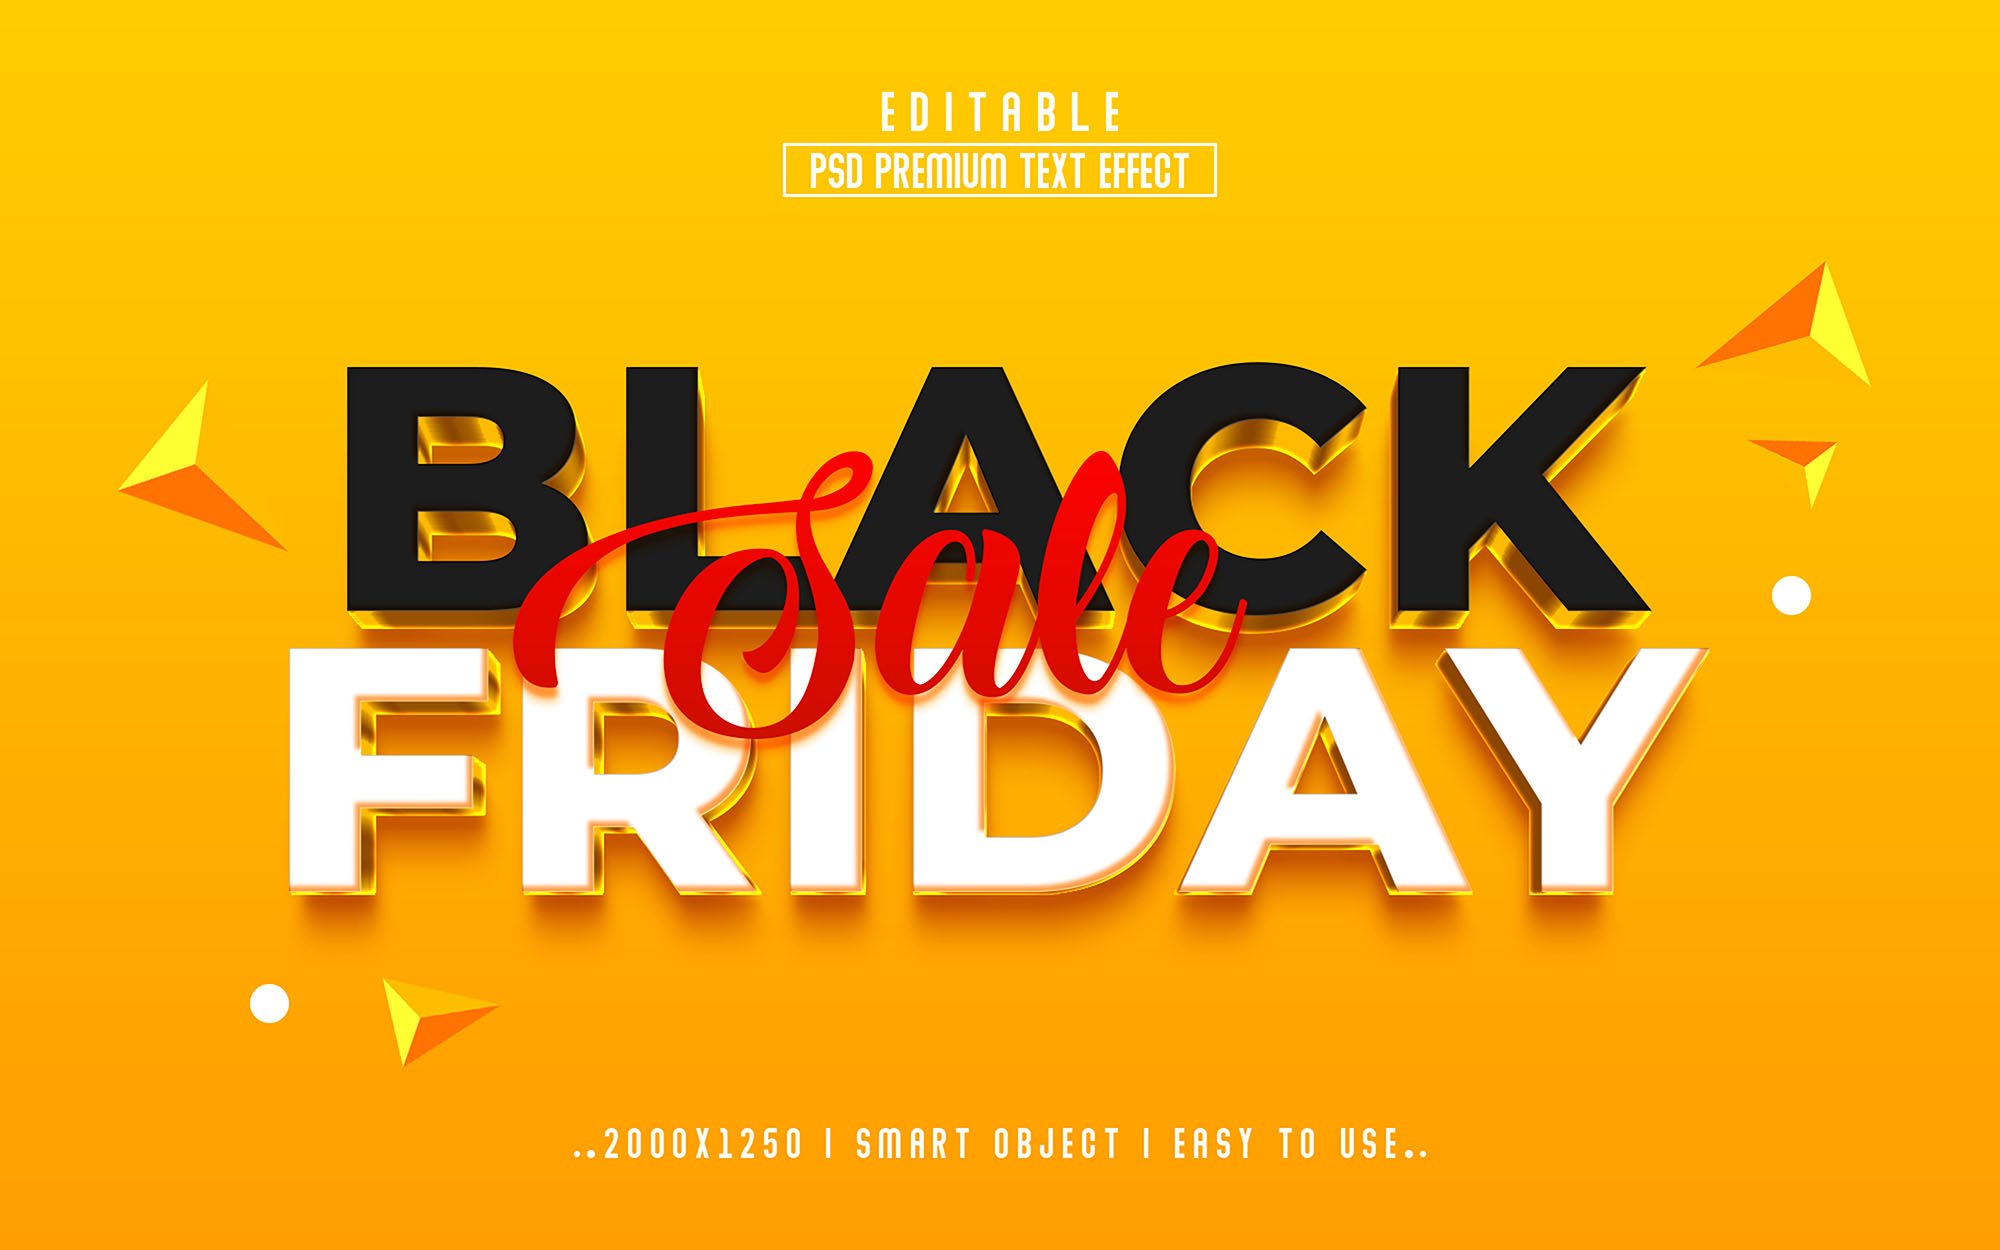 Black friday poster with a yellow background.